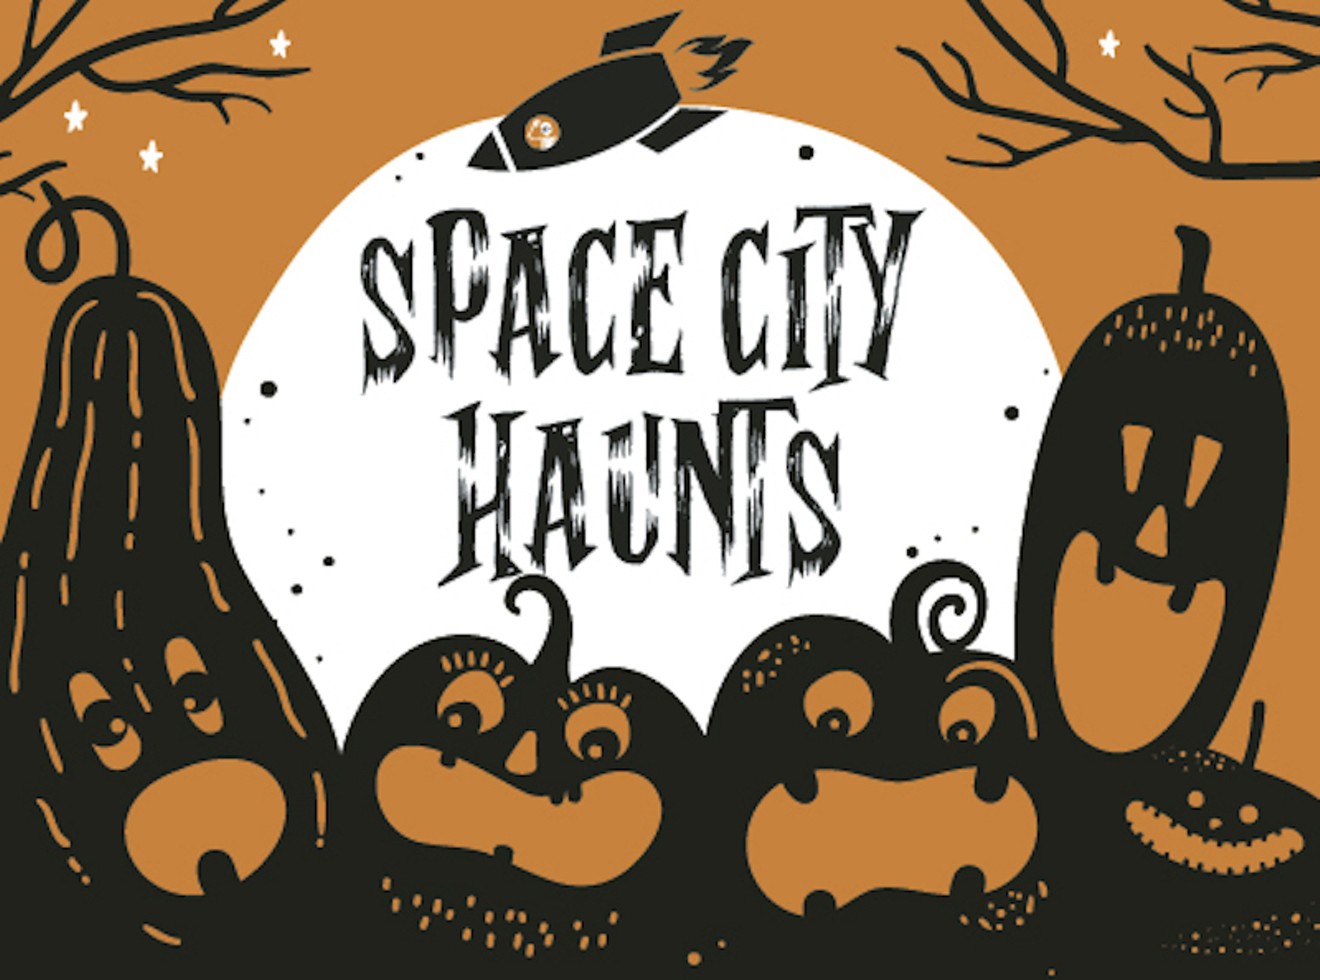 This year, Houston has plenty of tricks and treats up its sleeve for Halloween.